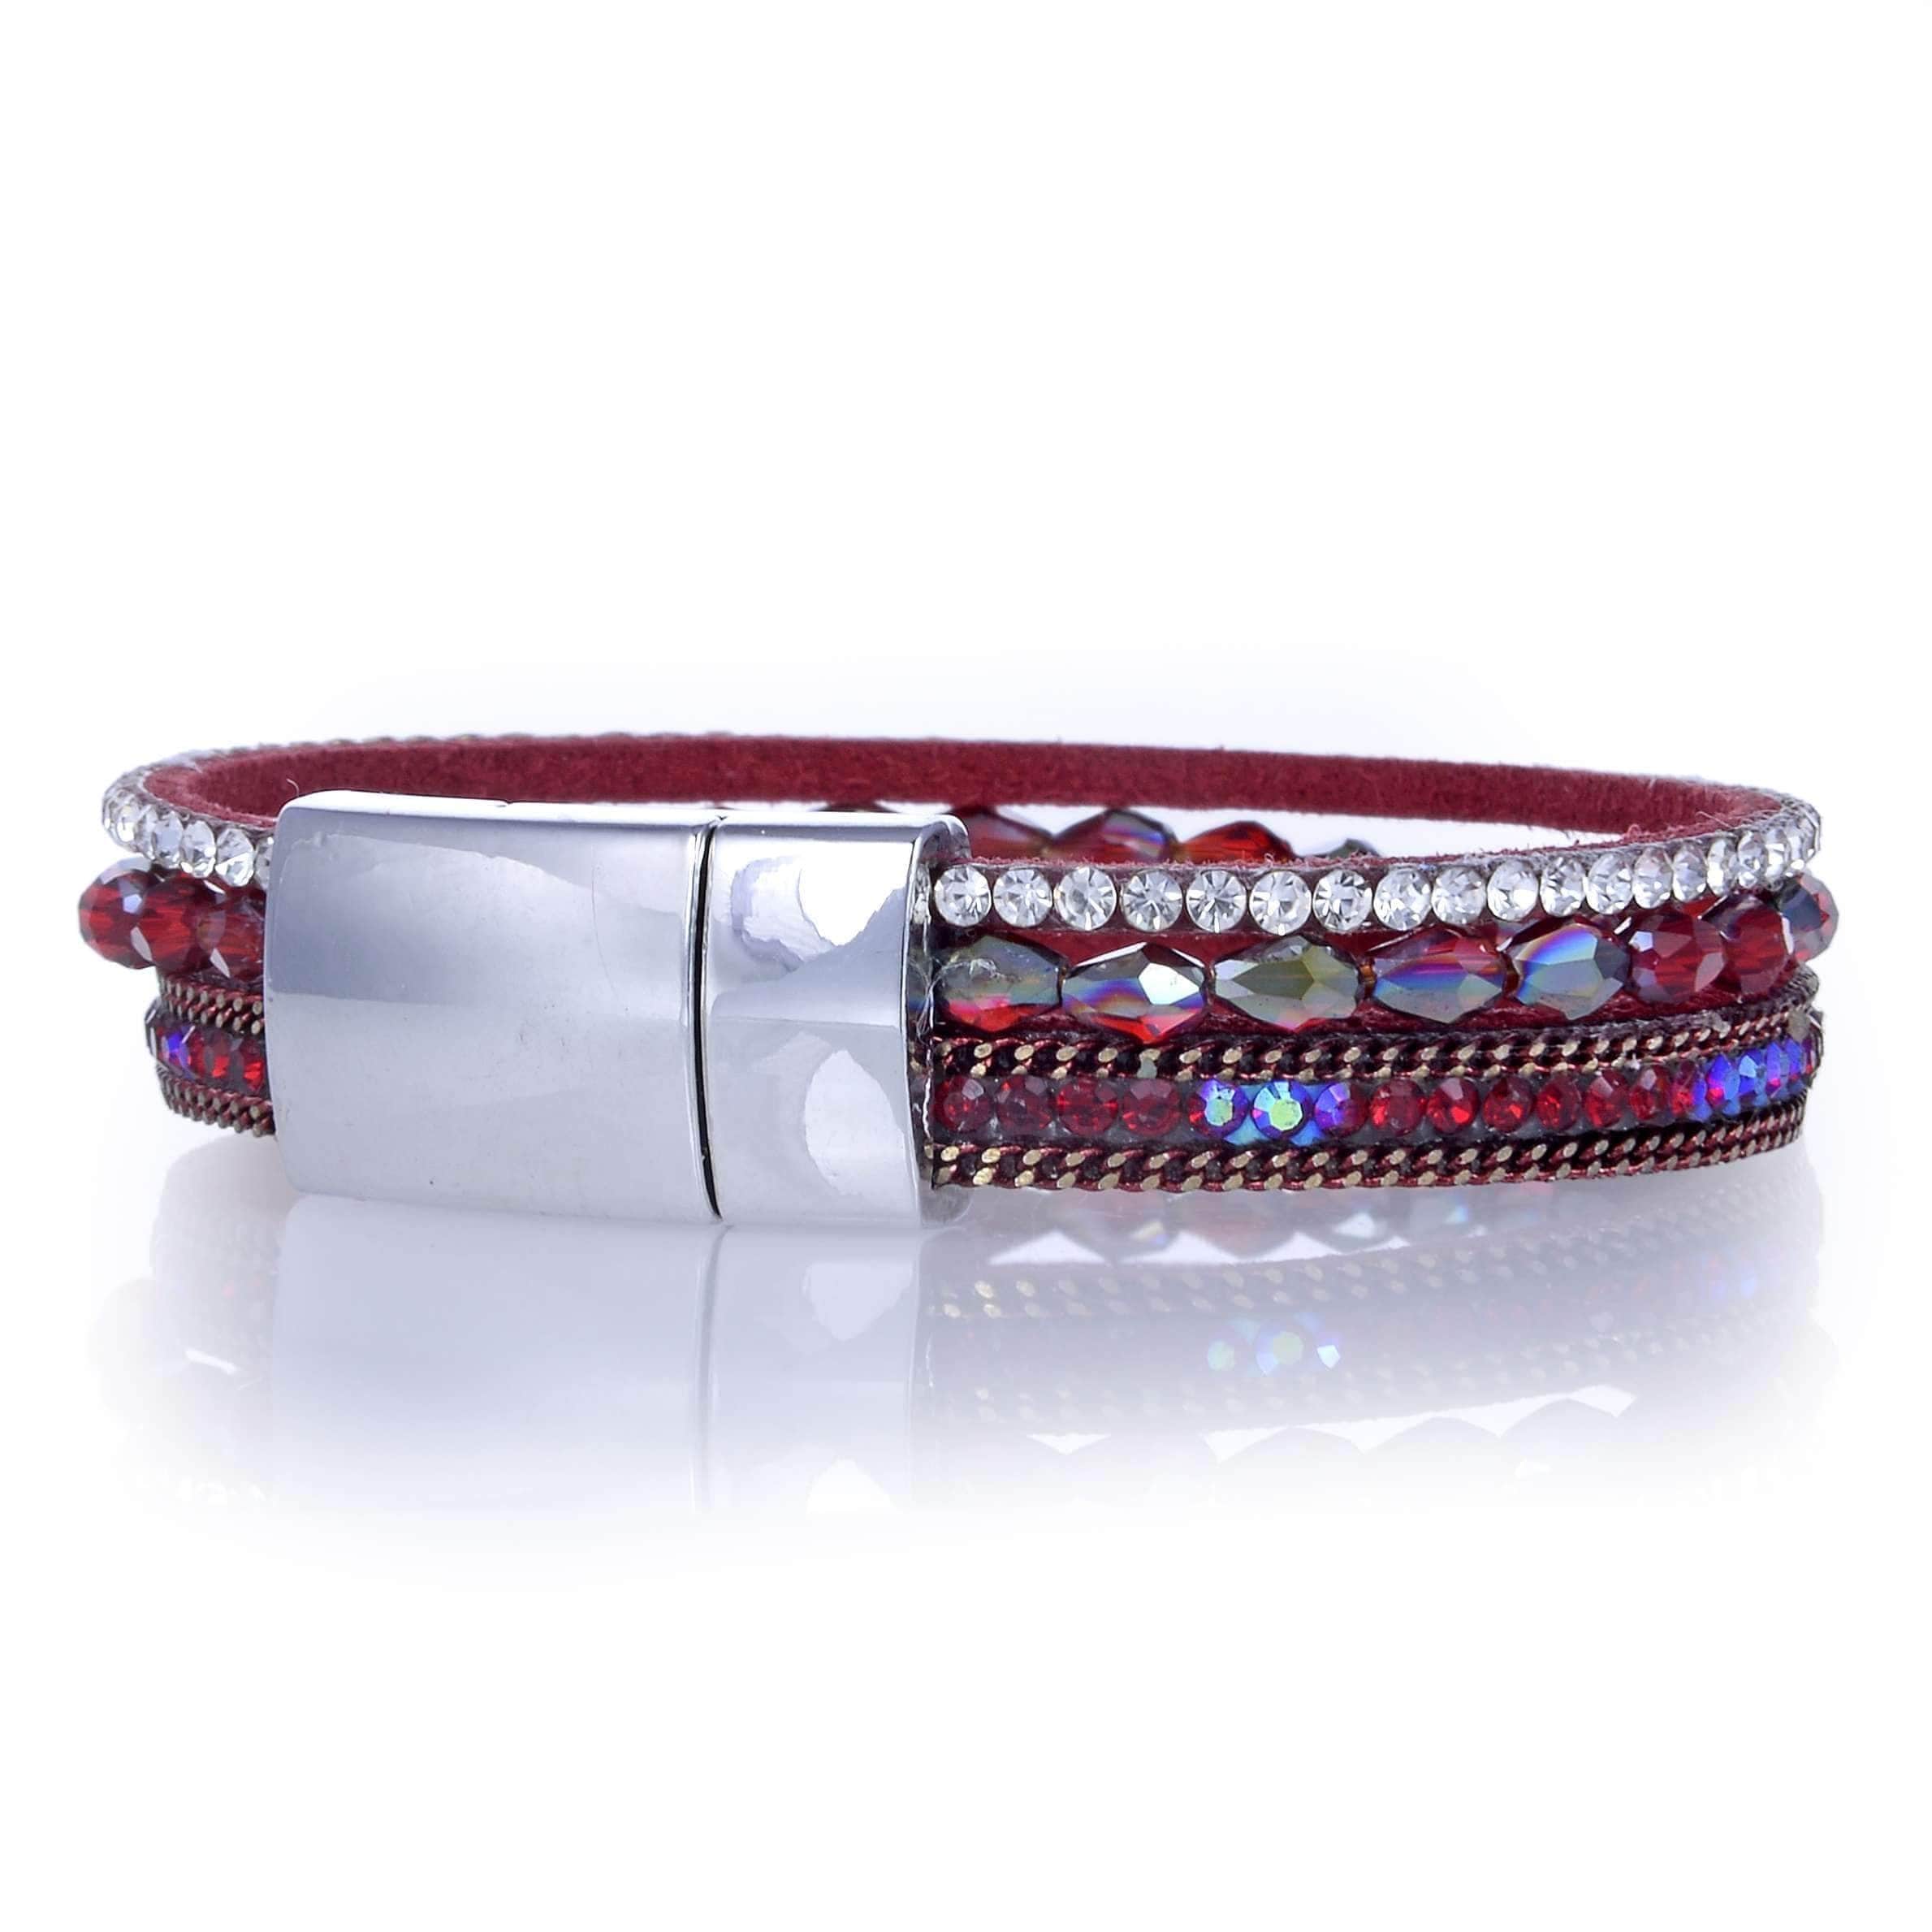 Kalifano Multiwrap Bracelets BMW-19-RD - Multiple Layer Strands Leather Band Bracelet Briolette Gemstone Bead Red with Magnetic Clasp BMW-19-RD